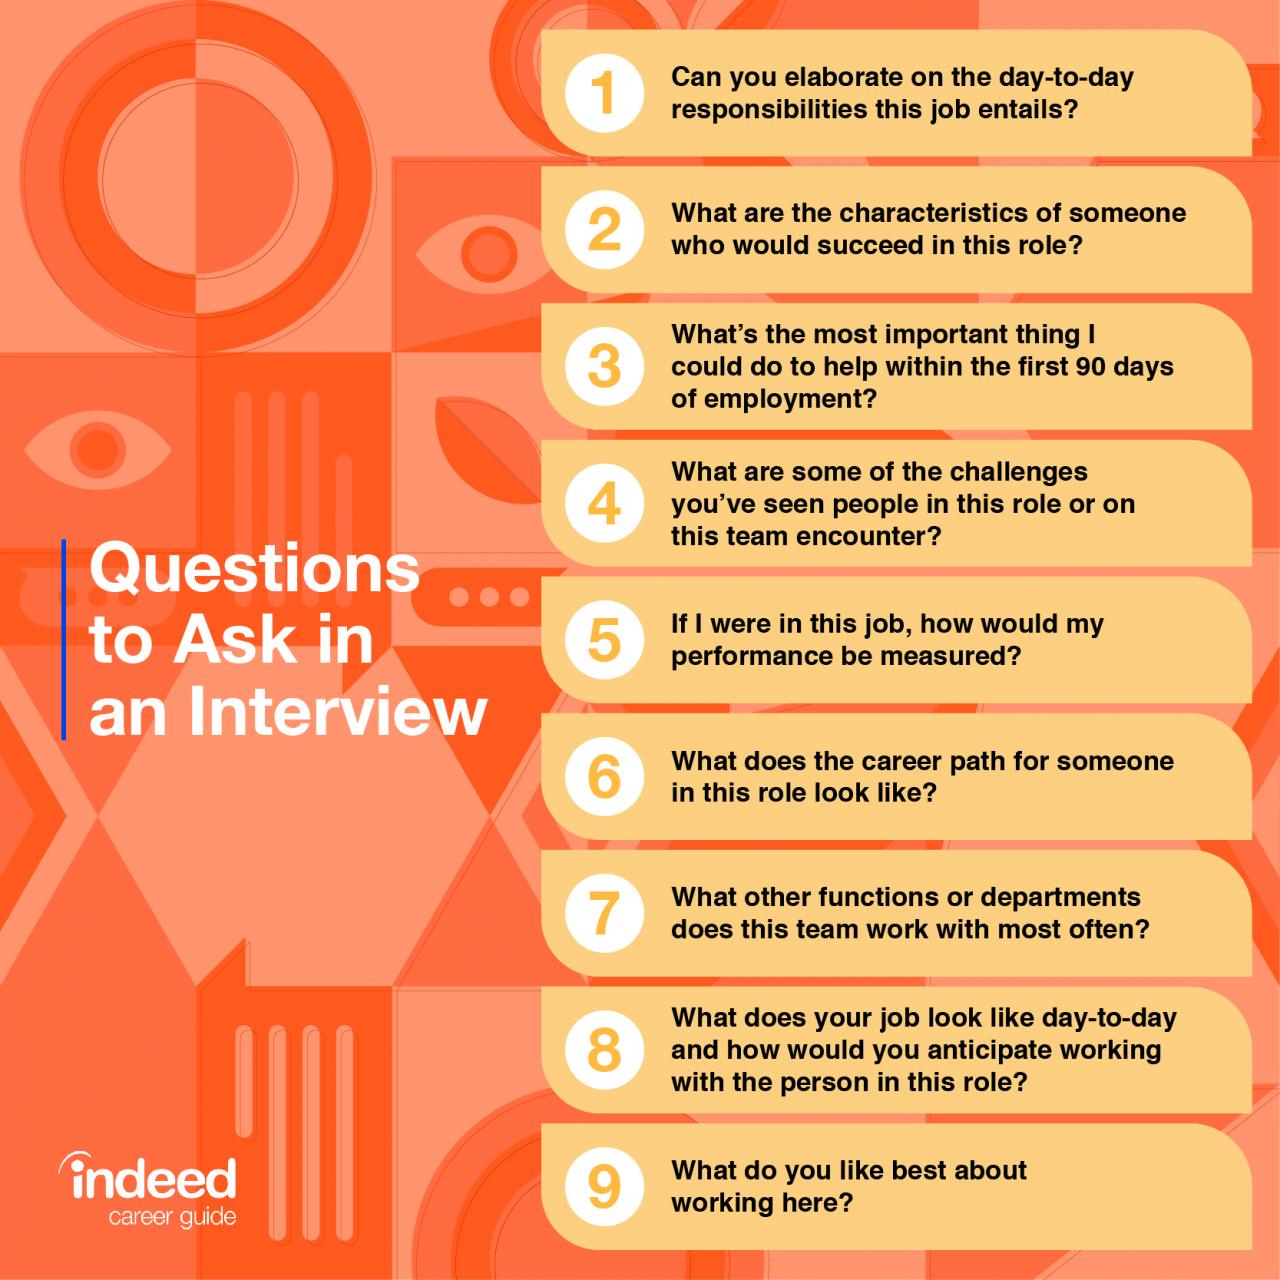 Good questions for an employer to ask in an interview